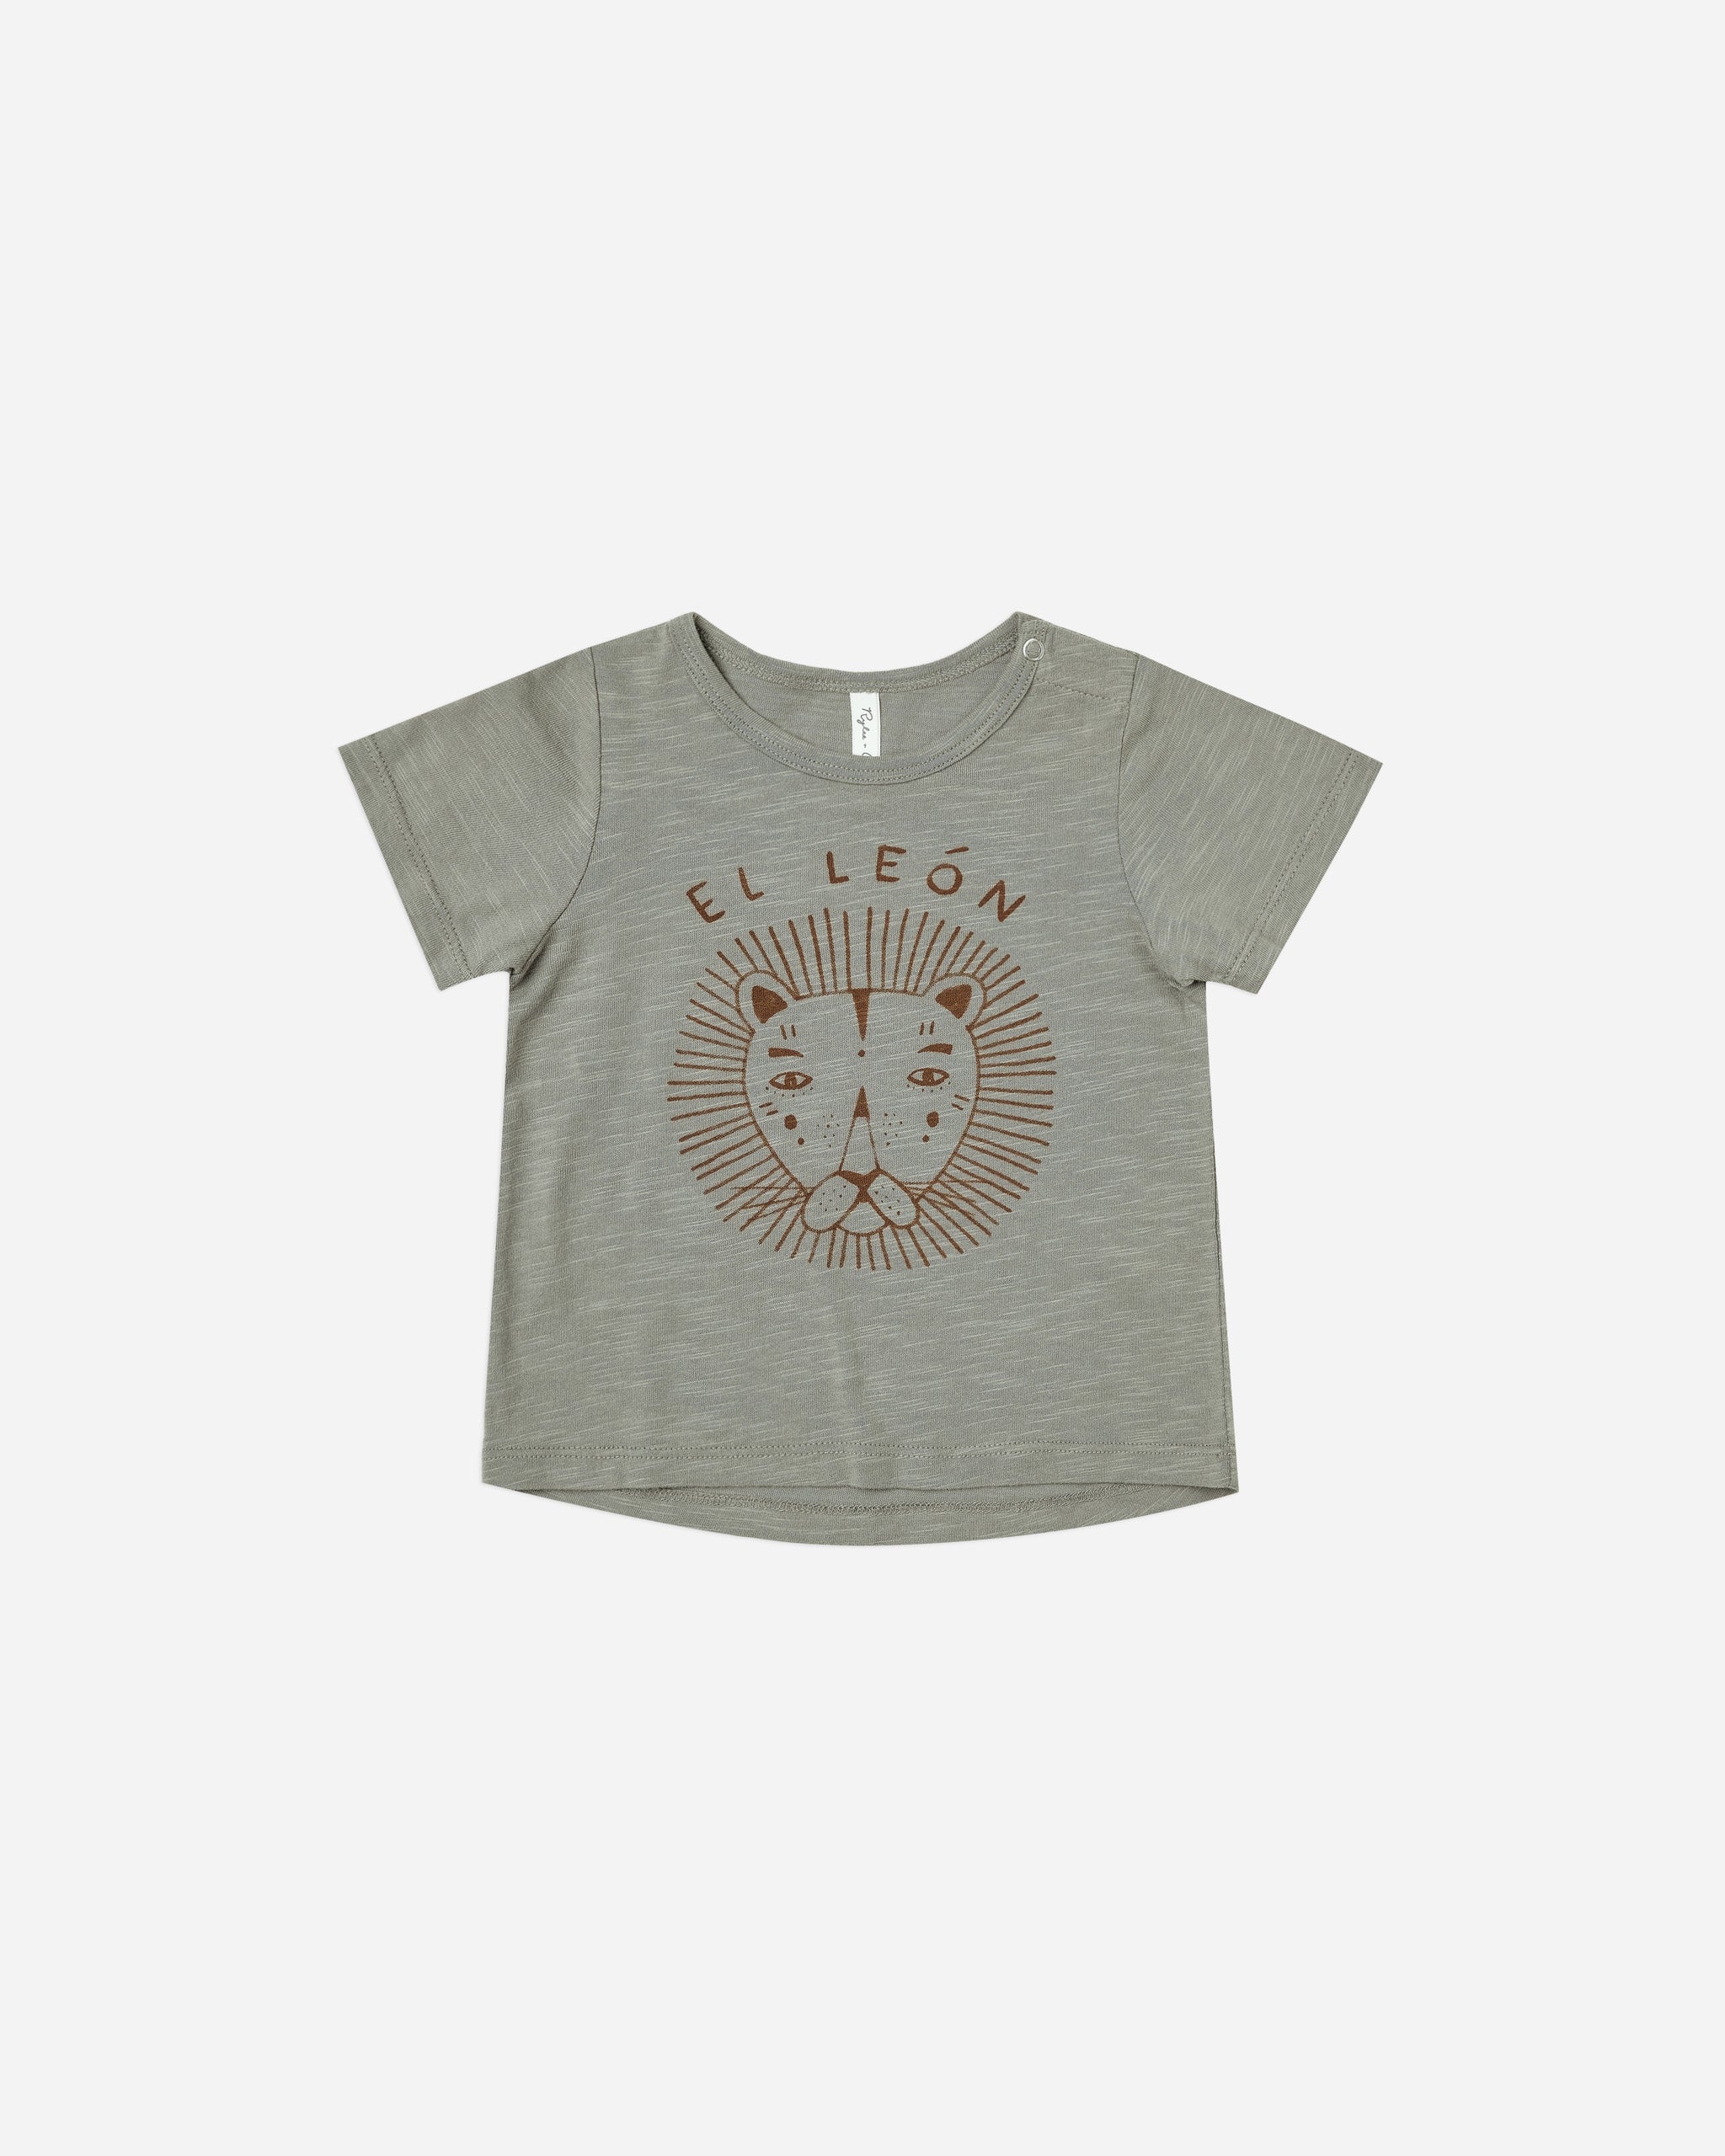 basic tee || el león - Rylee + Cru | Kids Clothes | Trendy Baby Clothes | Modern Infant Outfits |